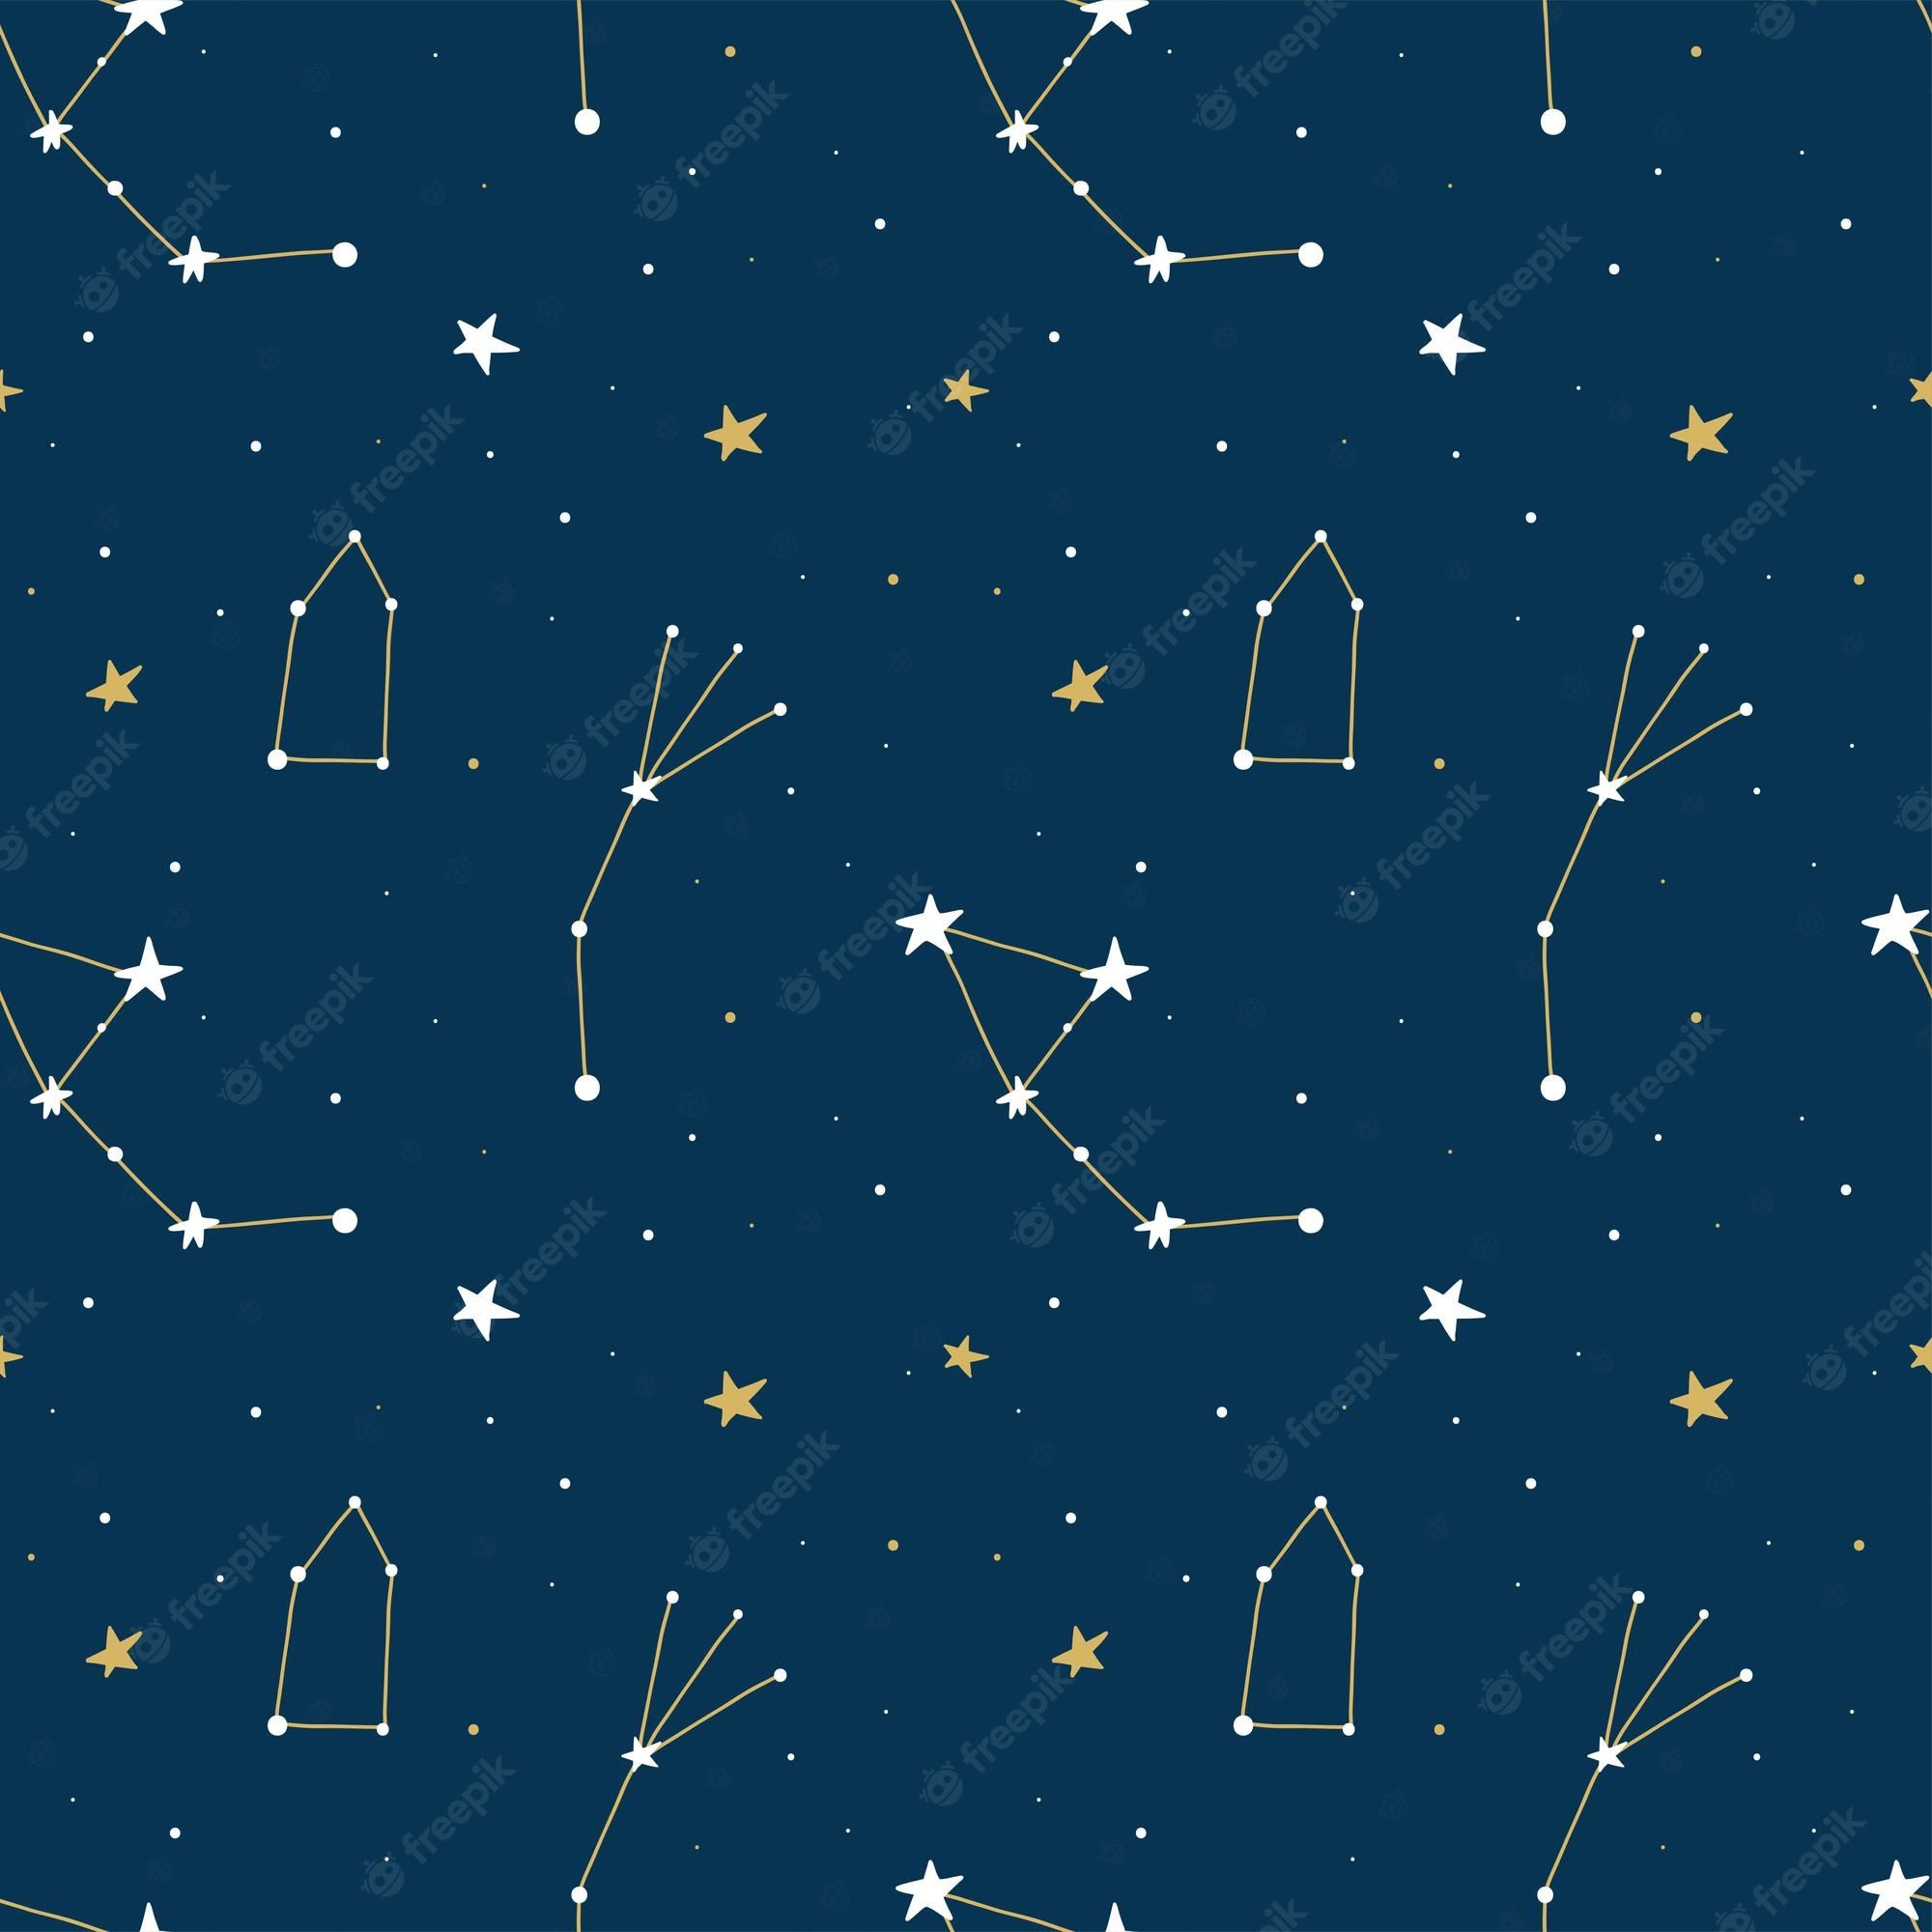 A pattern with stars and constellations on blue background - Constellation